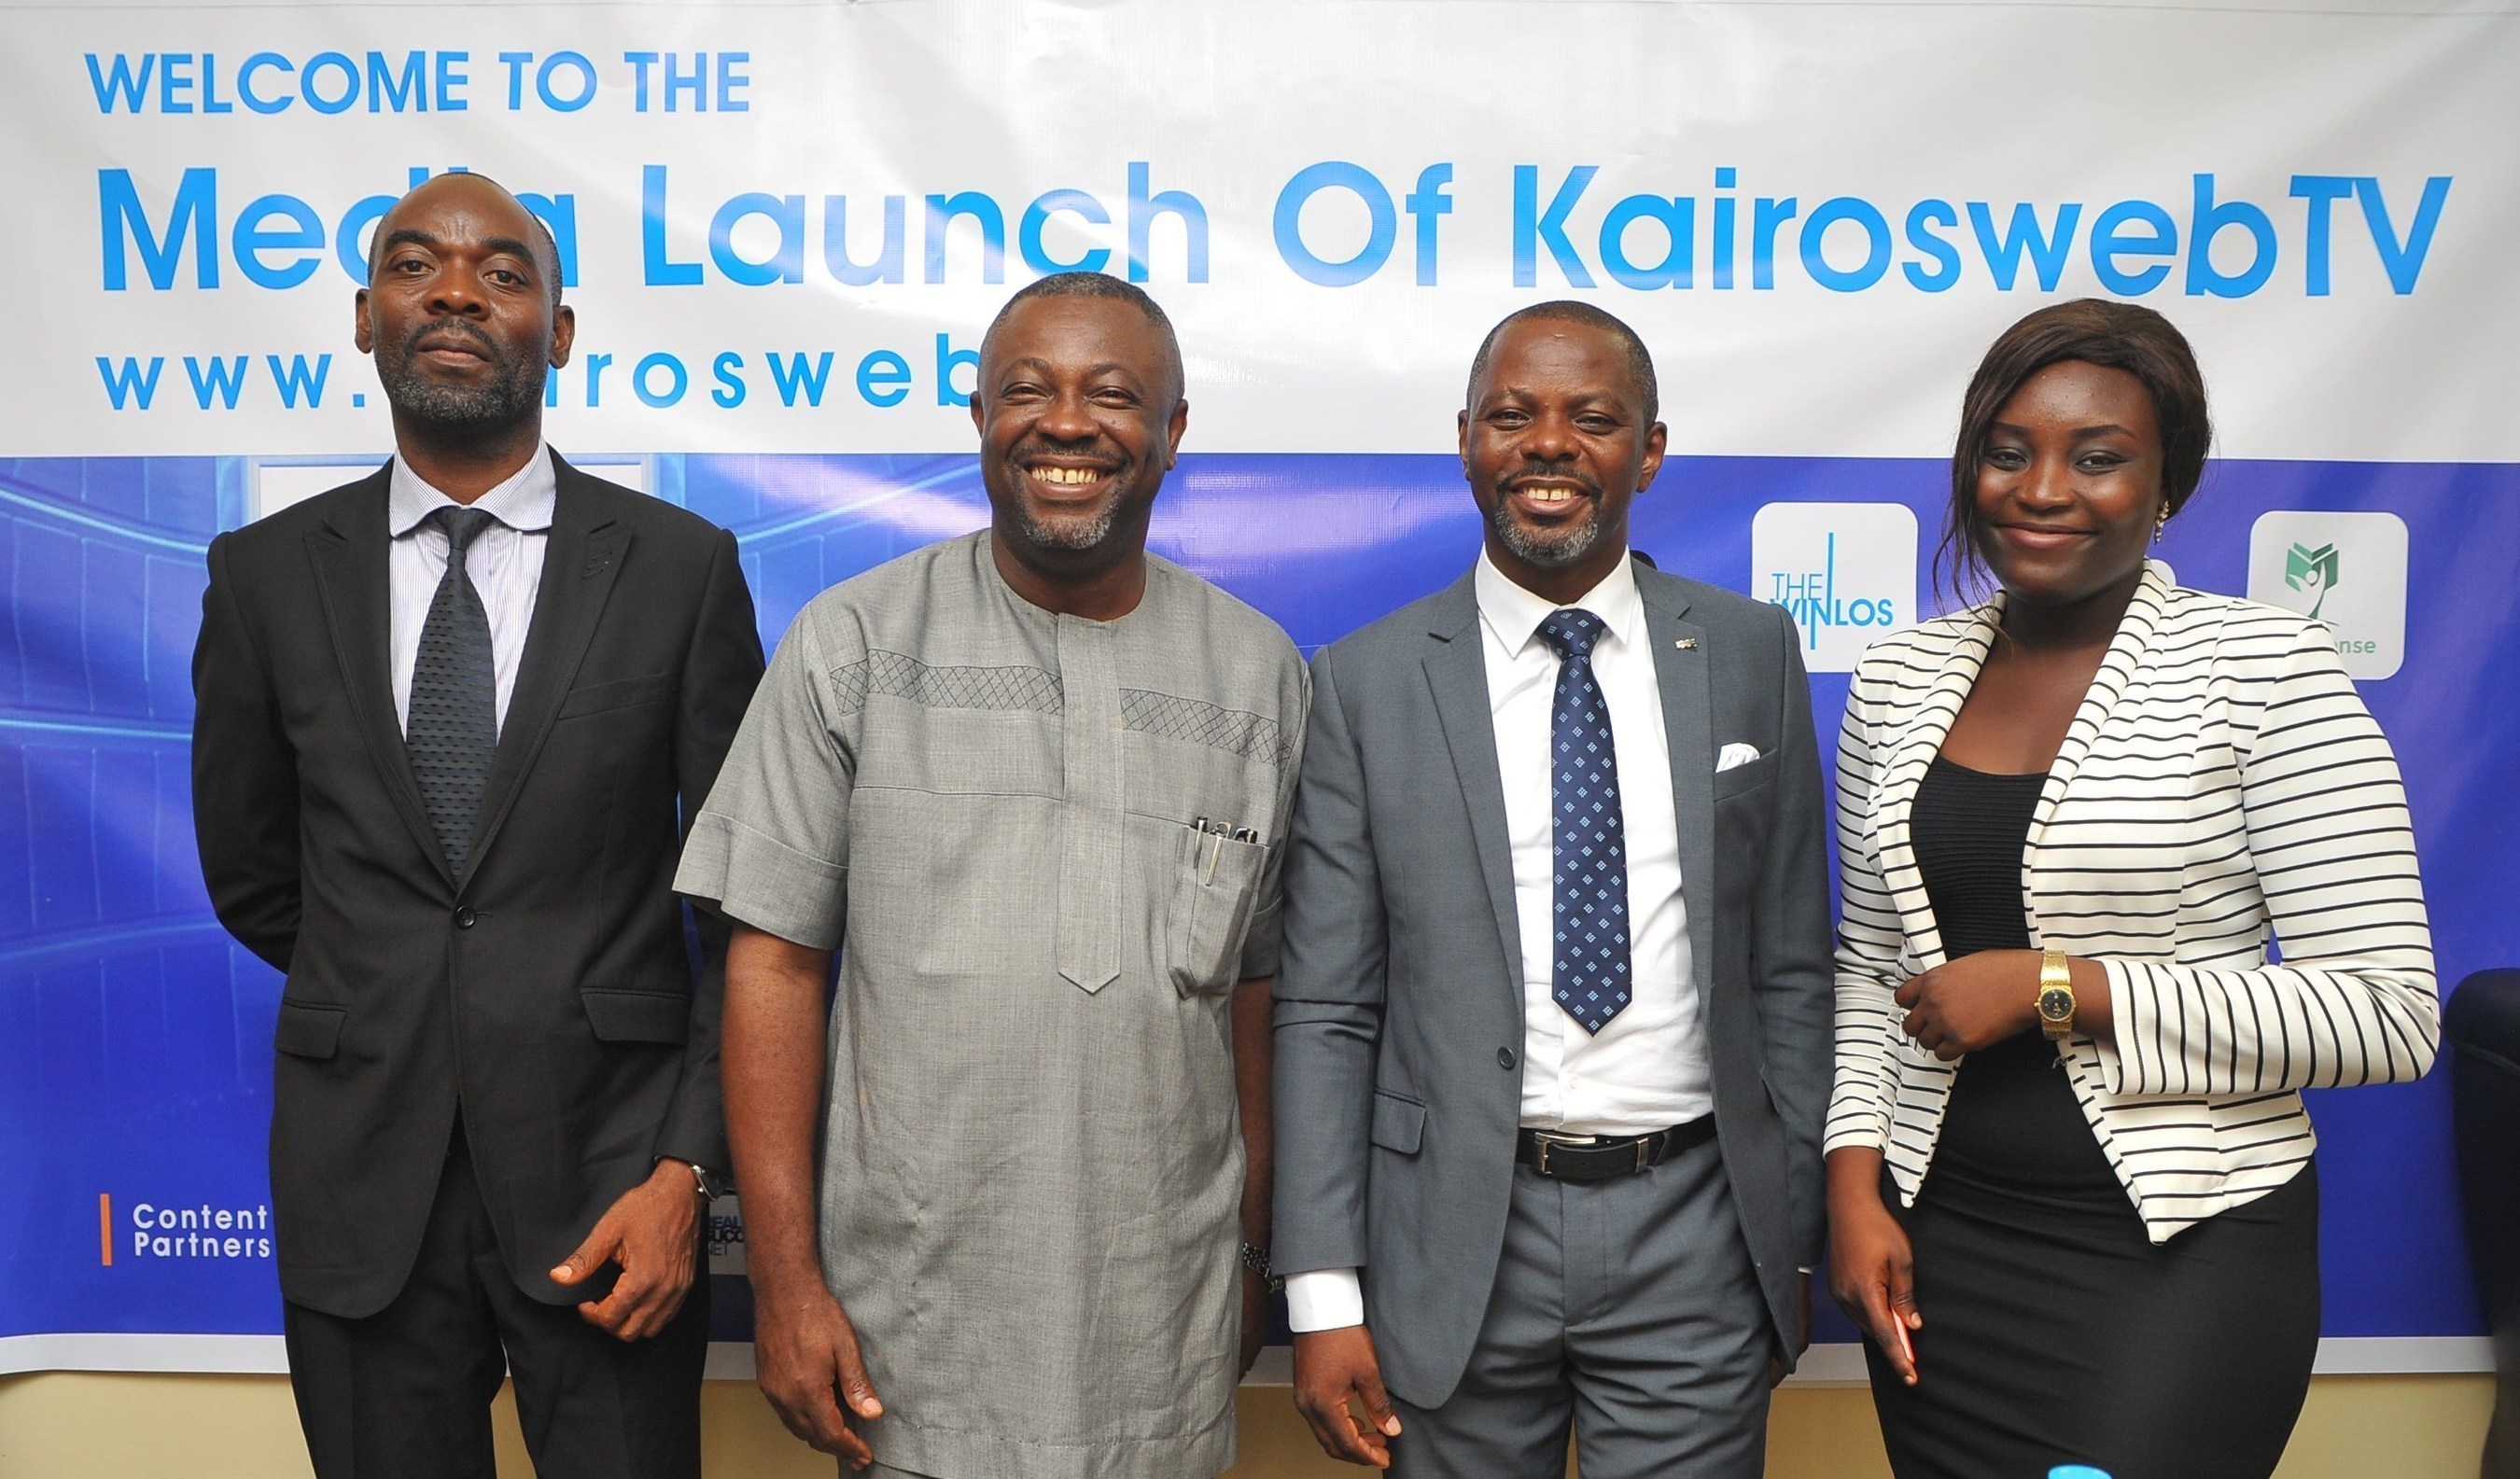 From Left: Mr. Ejiro Eghagha, Managing Partner Mercury West Africa, Mr Onoriode Akpe, Chief Executive Officer of Red Sappire Limited, Mr. Celestine Achi, the CEO of Cihan Group and the founder of KairosWebTV and Ms. Ruth Opakunle, Head Marketing of Cihan Group (PRNewsFoto/Cihan Group)